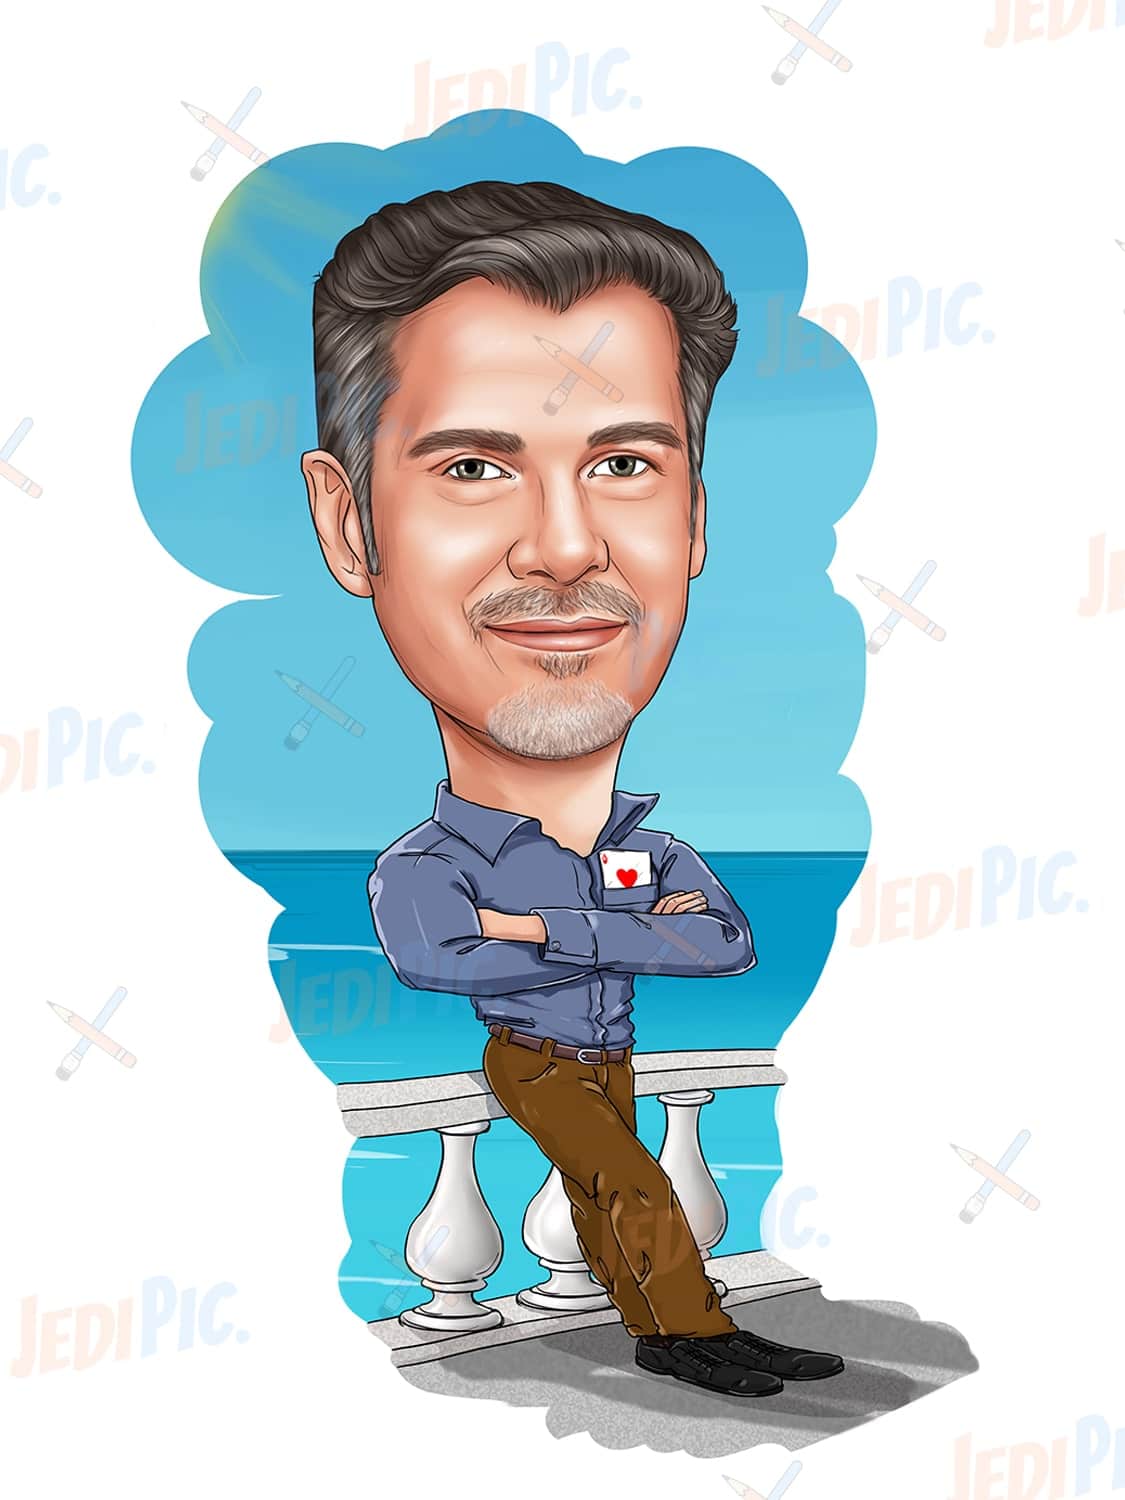 Digital Caricature of 1 person with Props and White Background